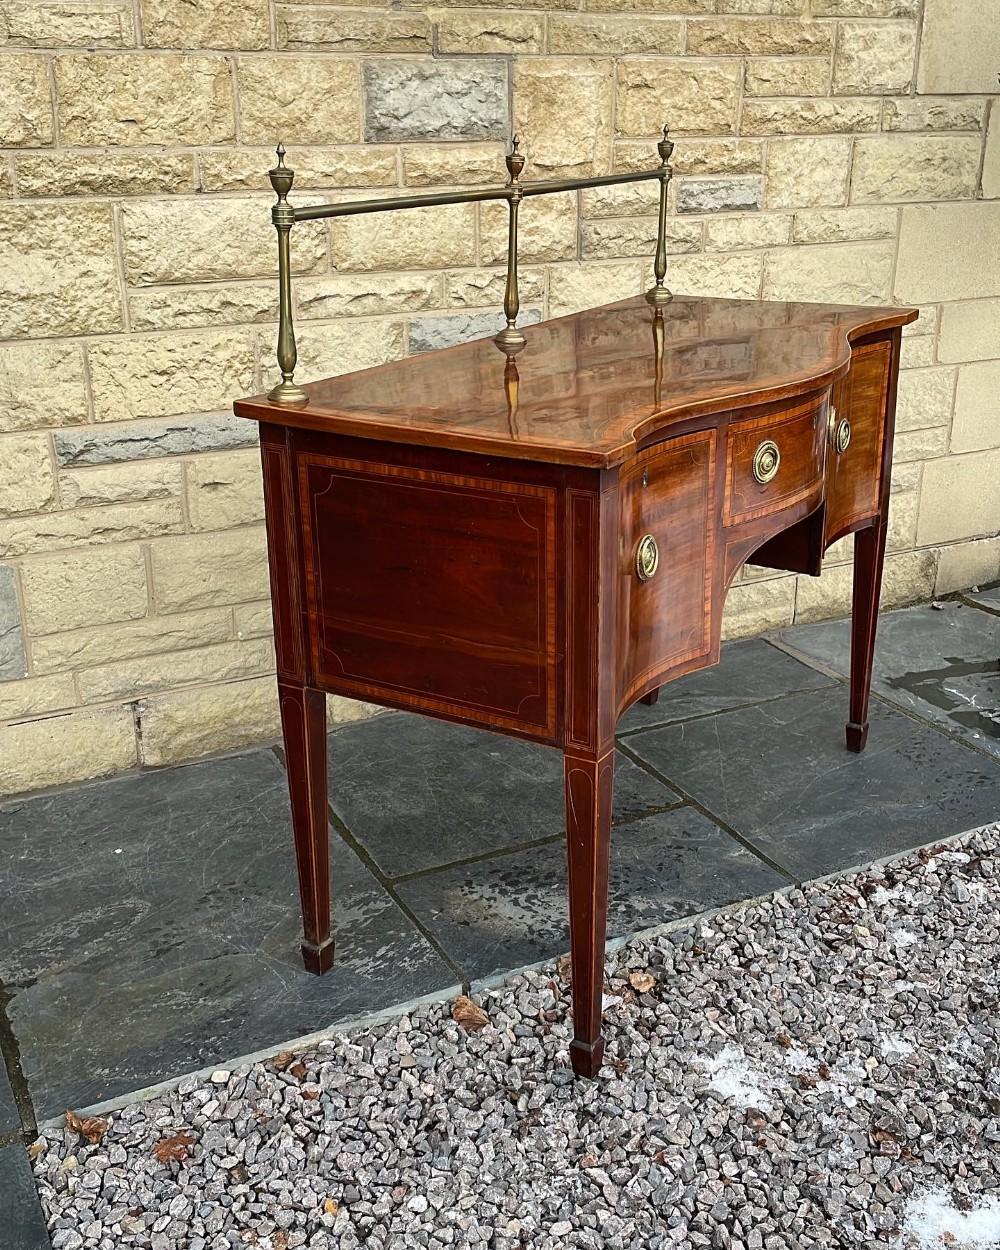 Hepplewhite  Early 19th C. English Inlaid Figured Mahogany Hepp. Style Serpentine Sideboard For Sale